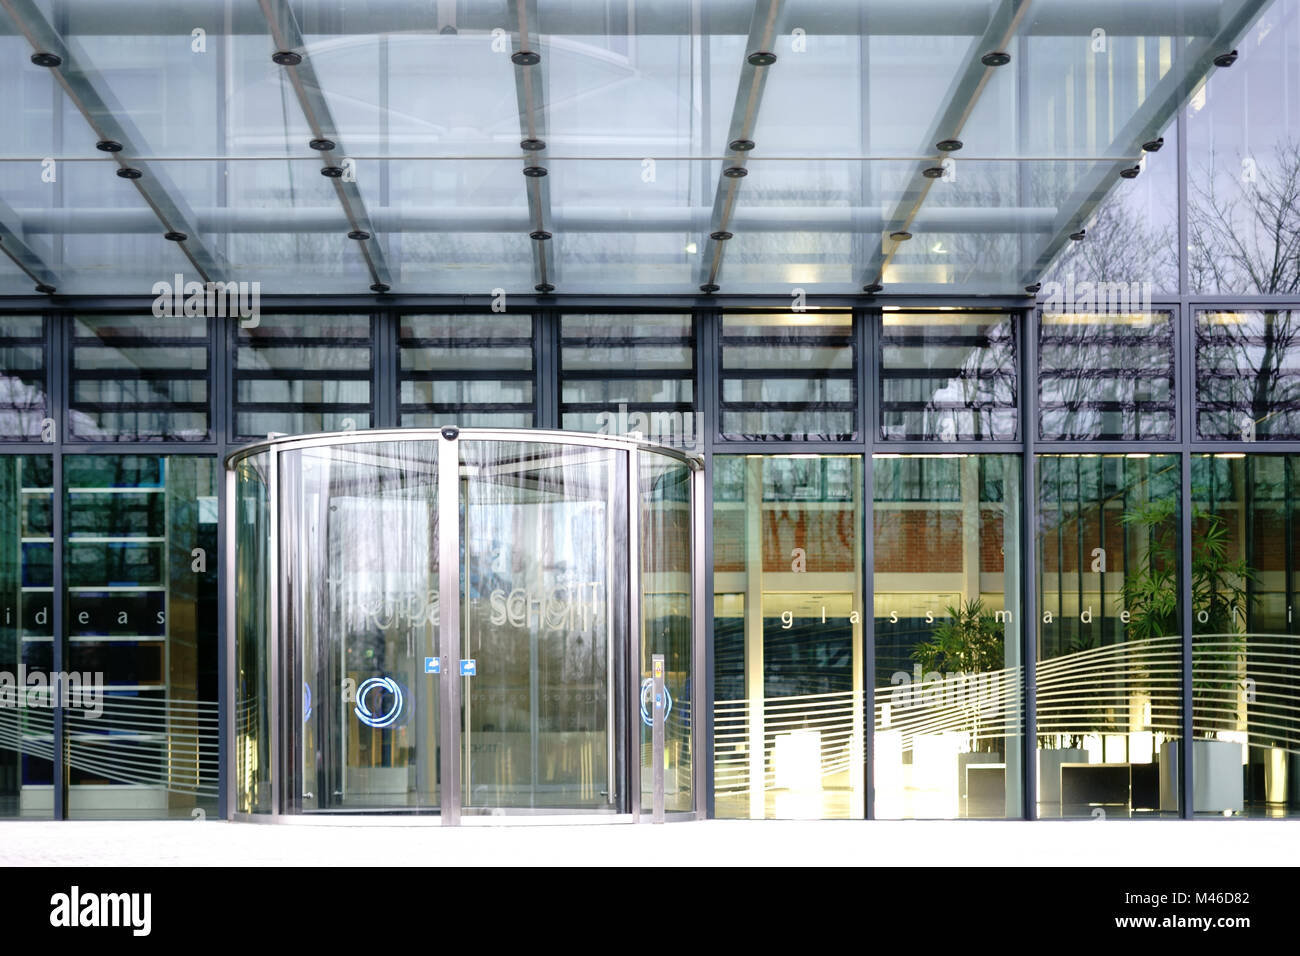 Mainz, Germany - February 10, 2018: The glass entrance of Schott AG headquarters in Mainz with a revolving door and a glass roof on February 10, 2018  Stock Photo